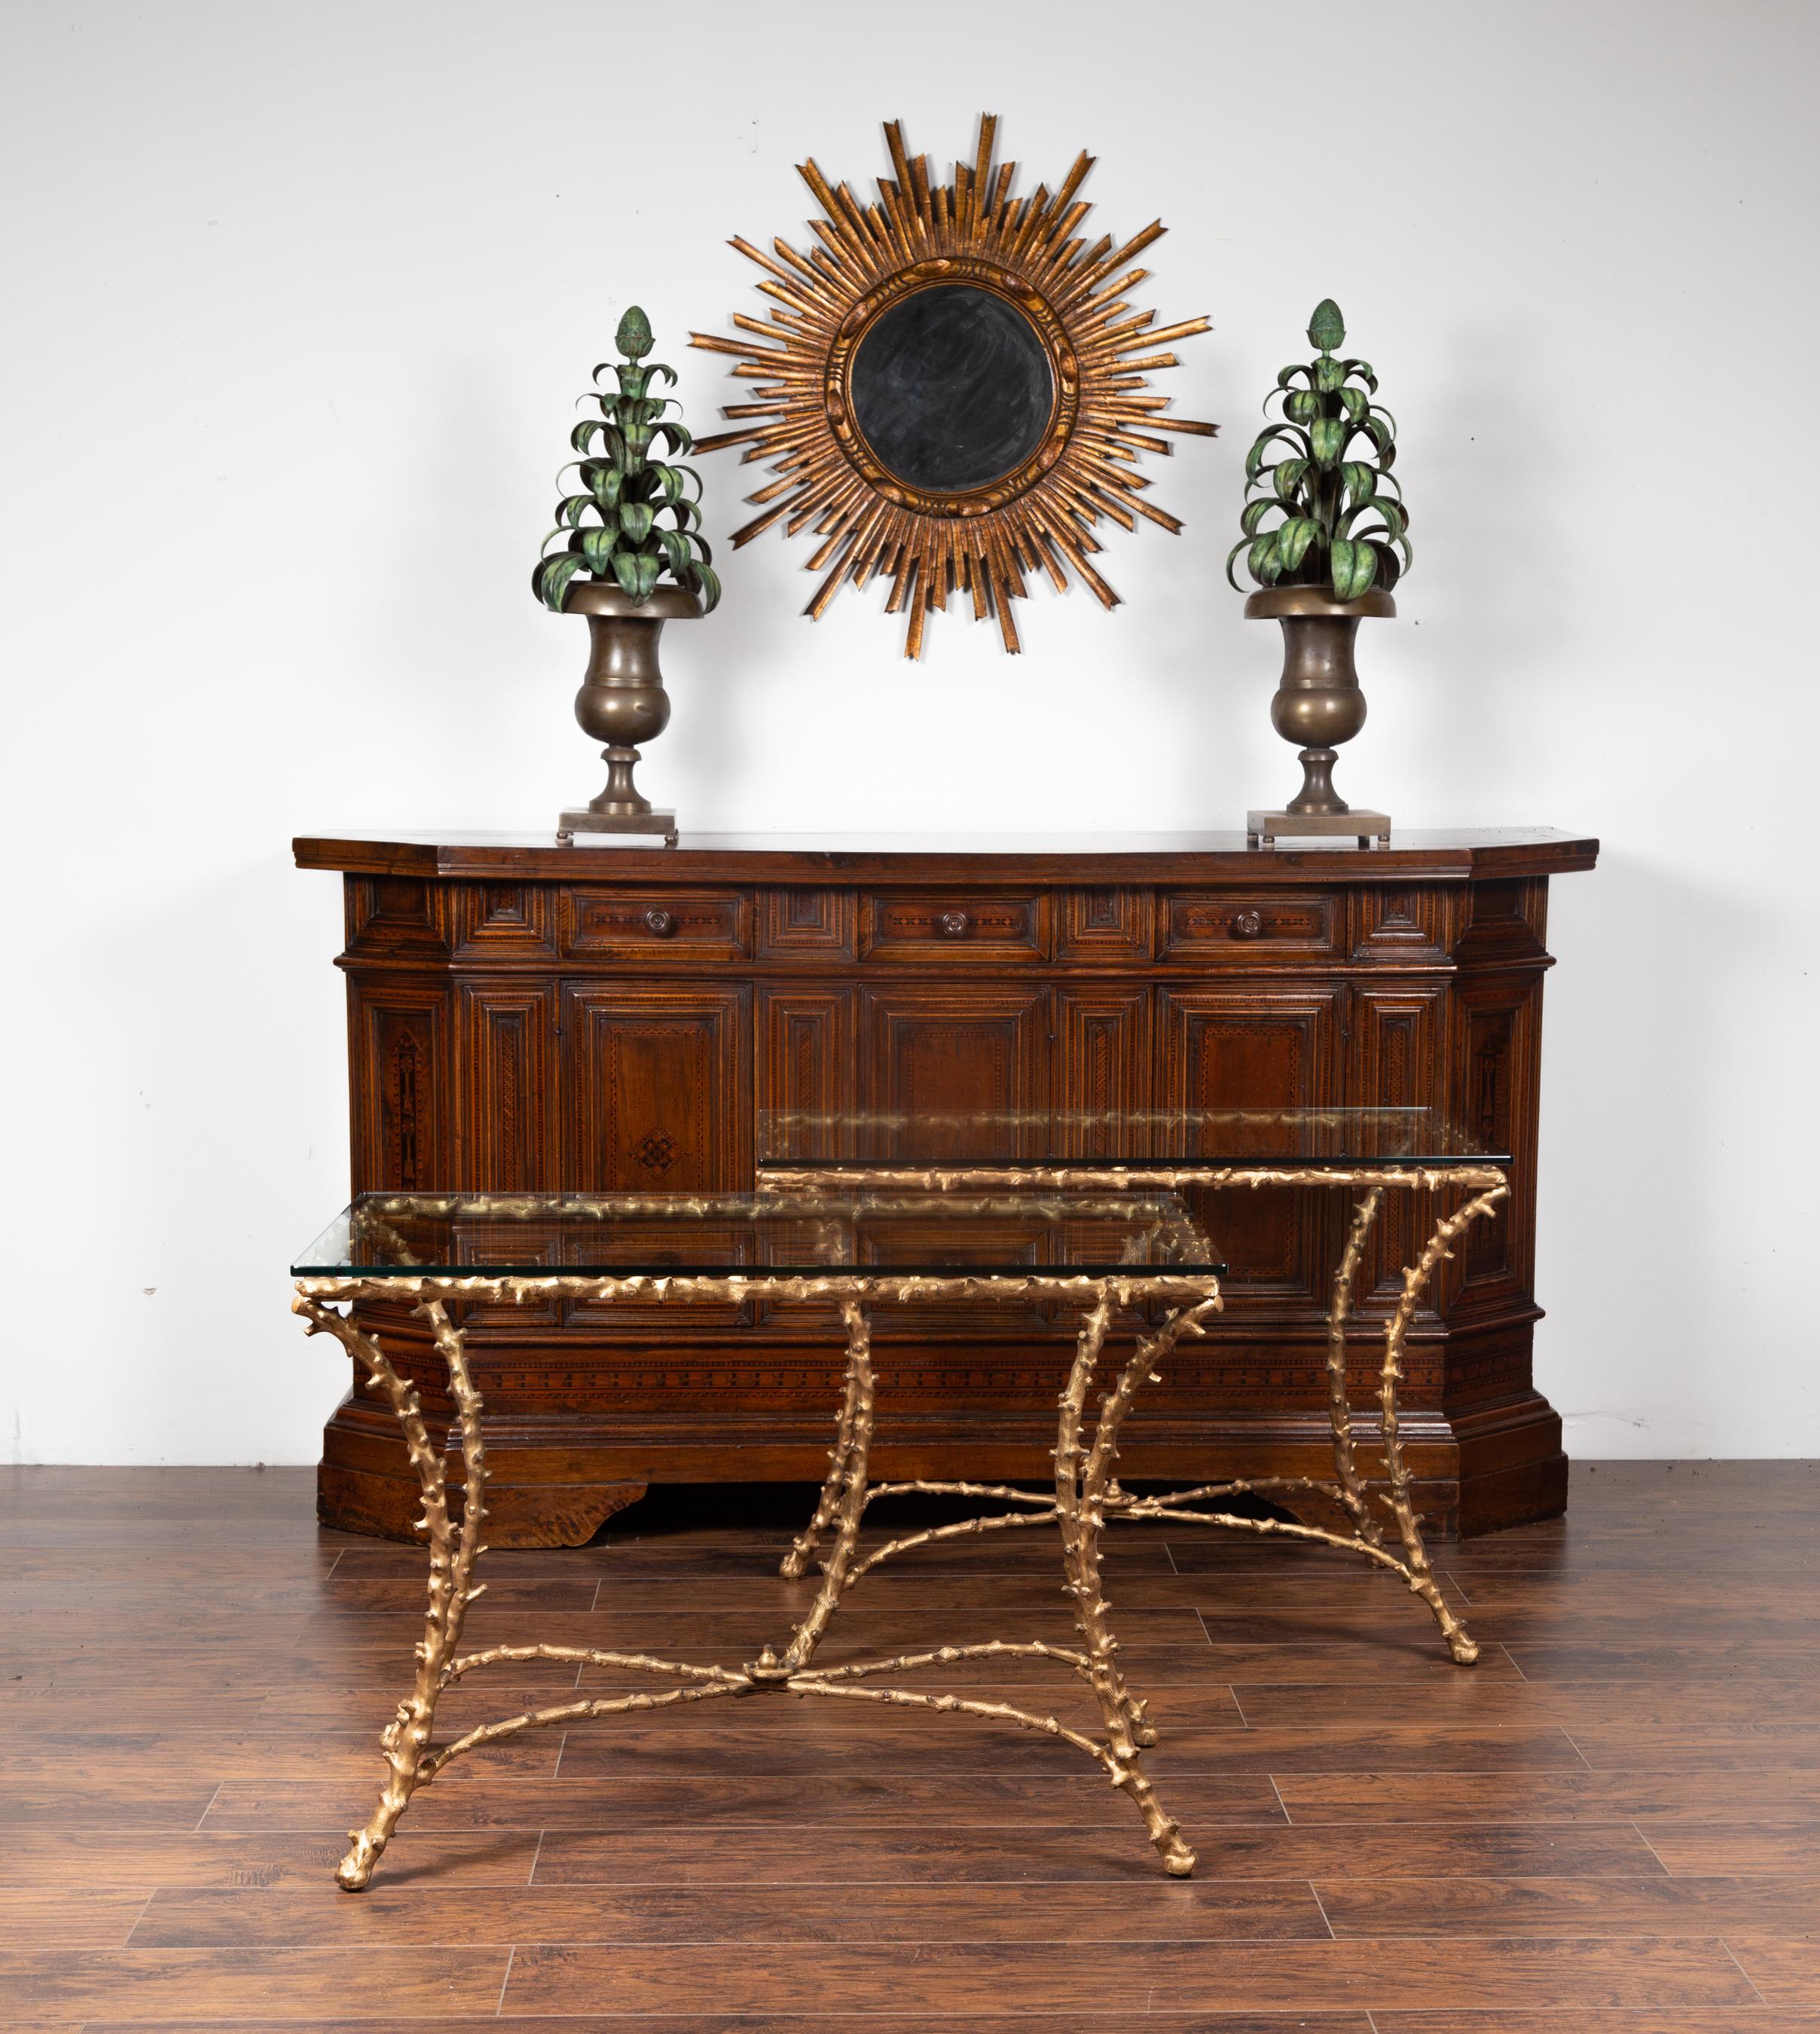 A pair of gilt bronze console tables from the mid-20th century, with faux bois motifs, glass tops and cross stretchers. Born during the midcentury period, each of these console tables attracts our attention with its stylish faux bois gilt bronze